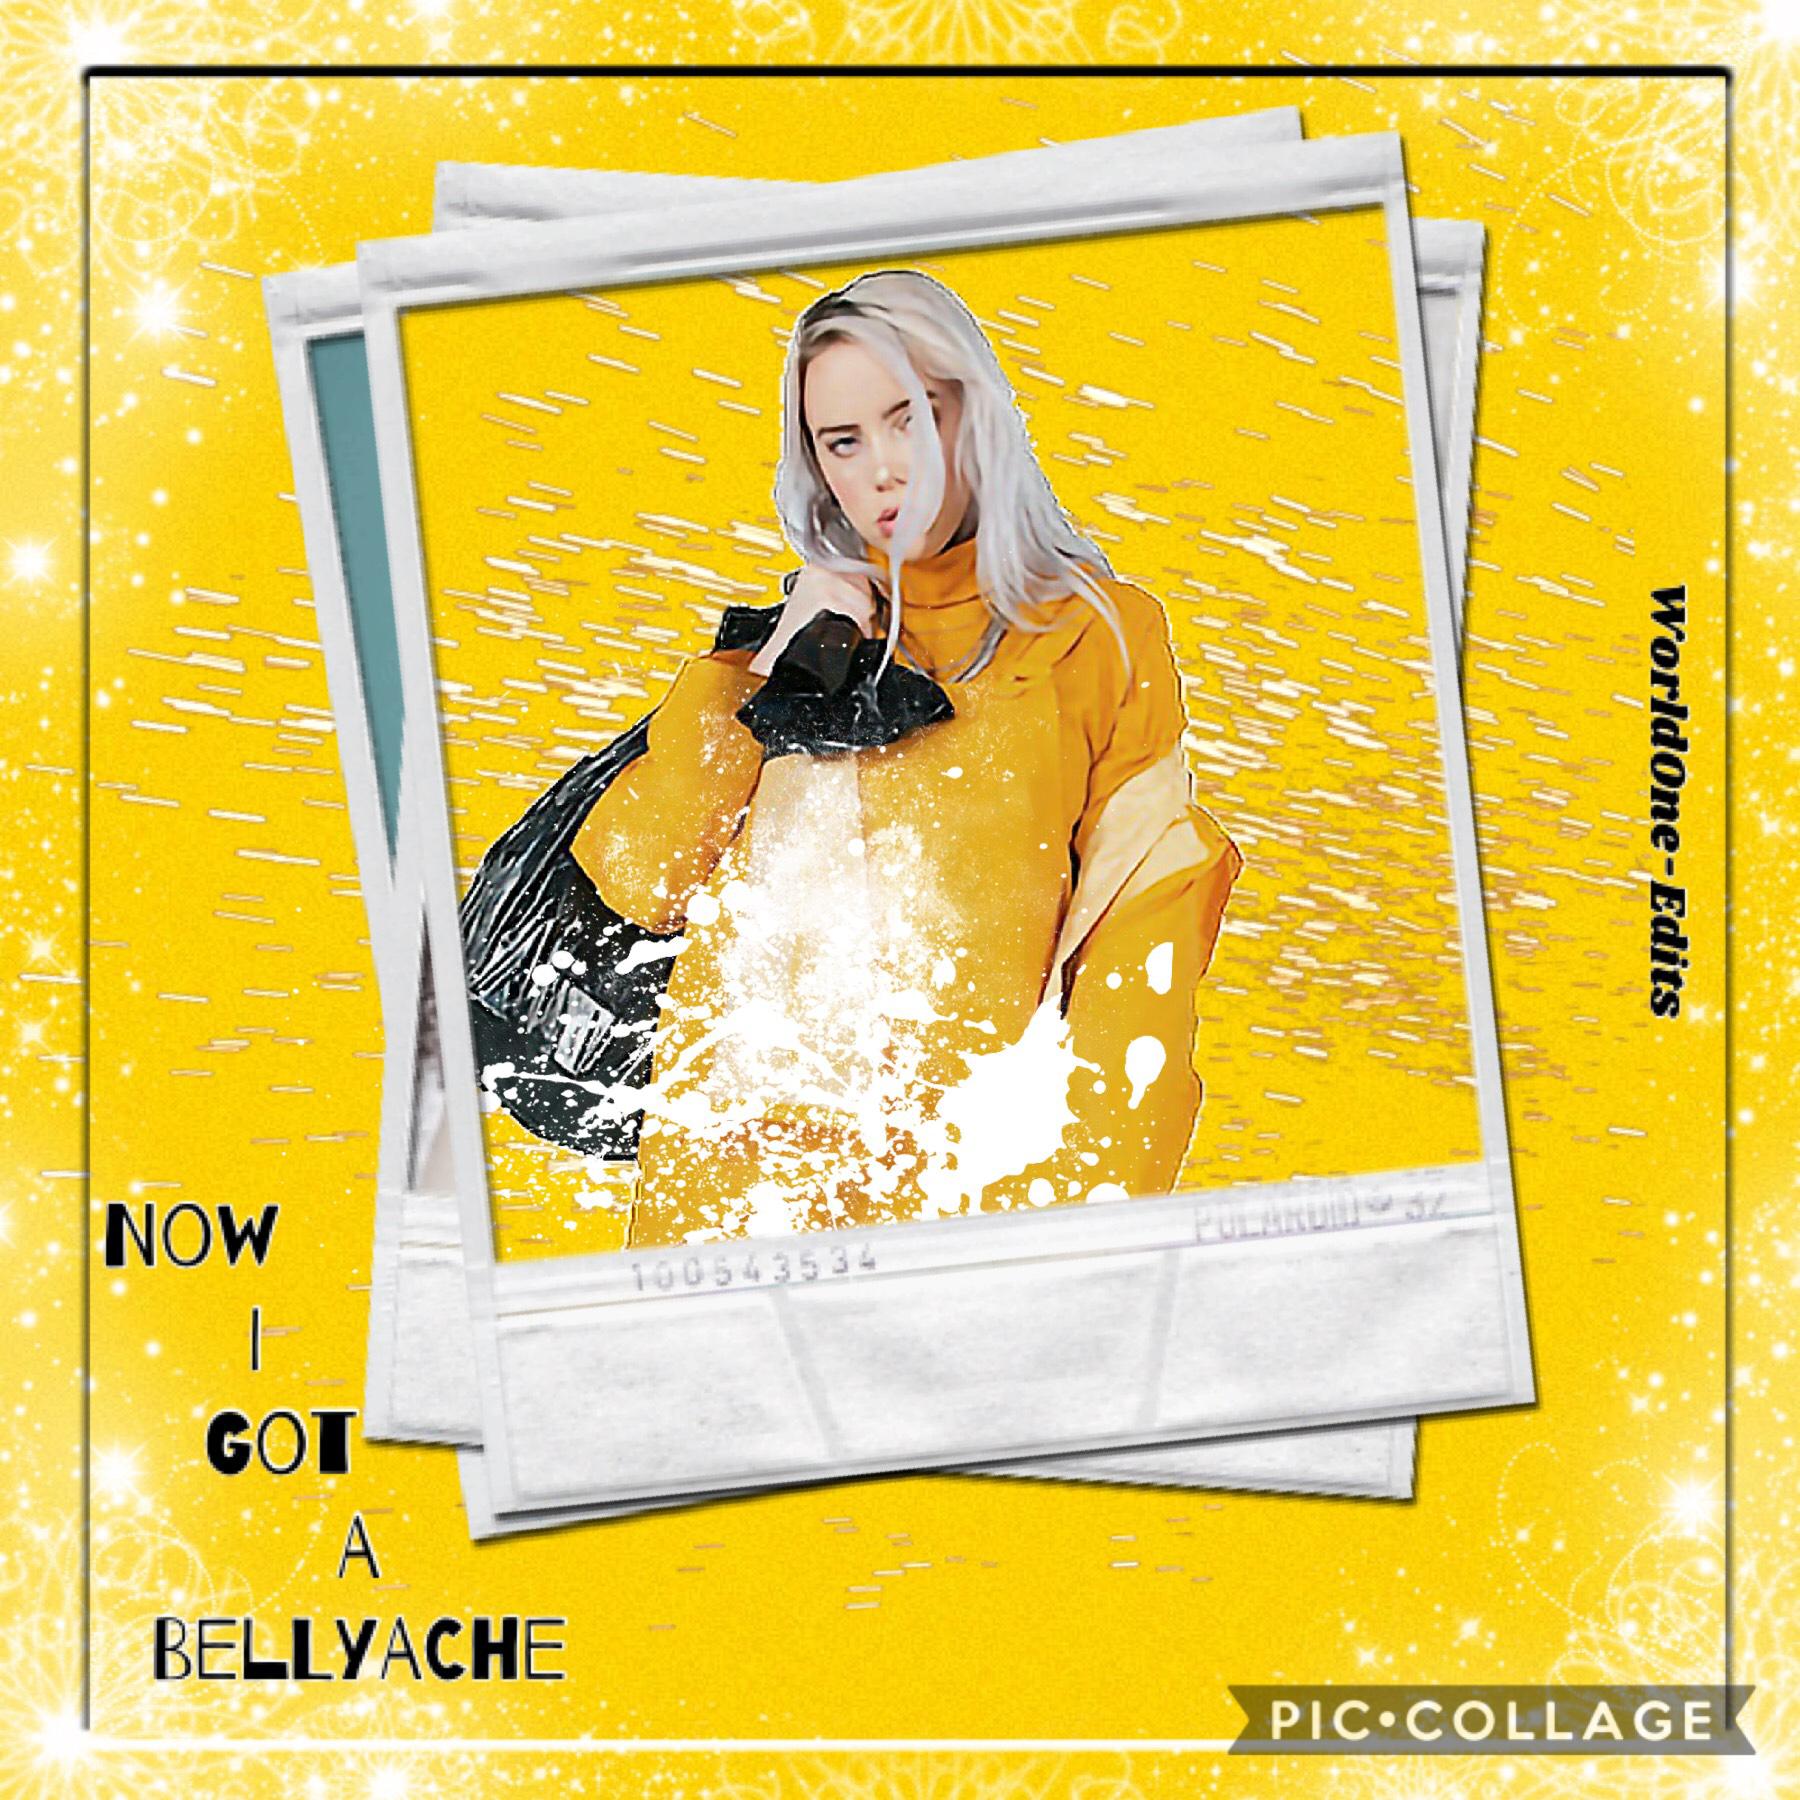 Billie Eilish edit!!Tap❤️
THANK YOU SOOO MUCH FOR 200 FOLLOWERS!!!!!! This means soo much to me I can’t believe this!!!! I’m currently making icons so if you want one just tell me what you would like it to be made out of✌🏽🤟🏽😂